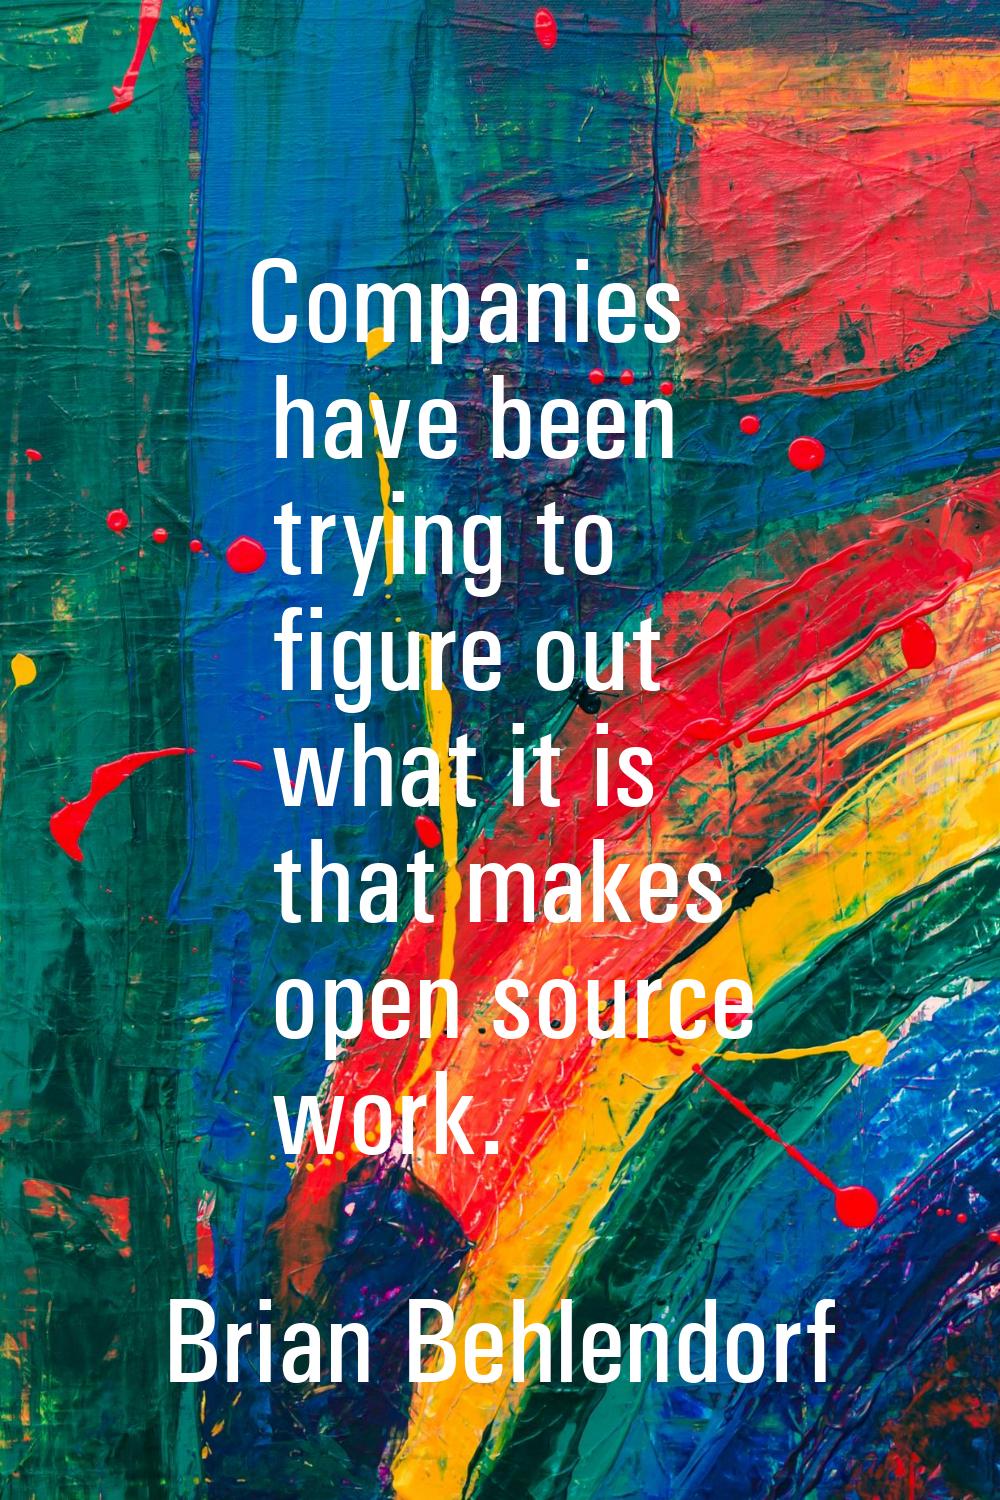 Companies have been trying to figure out what it is that makes open source work.